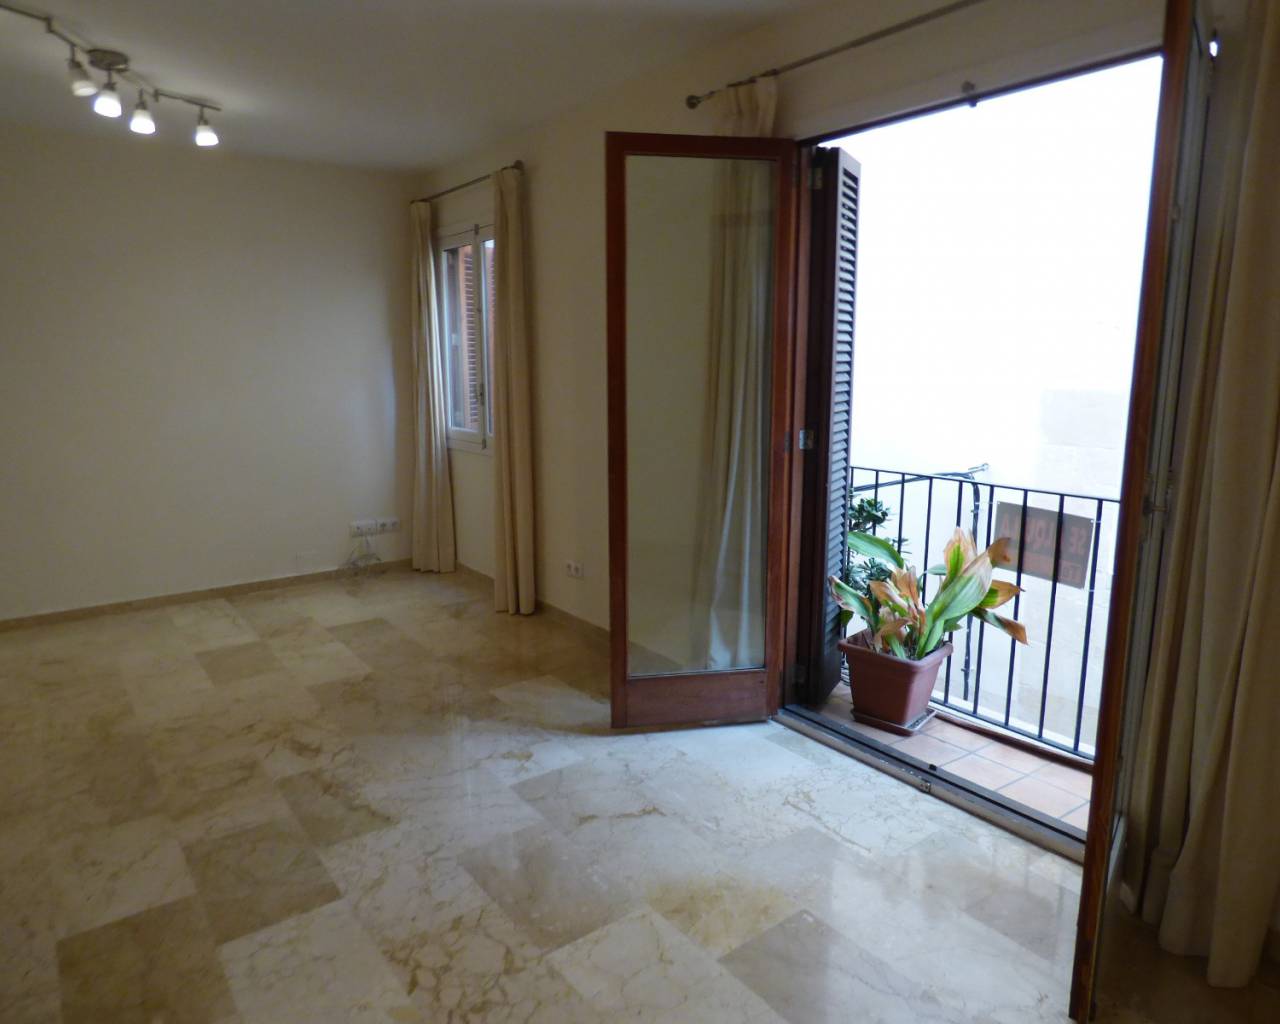 3 Bedroom apartment in rent in Palma,Mallorca